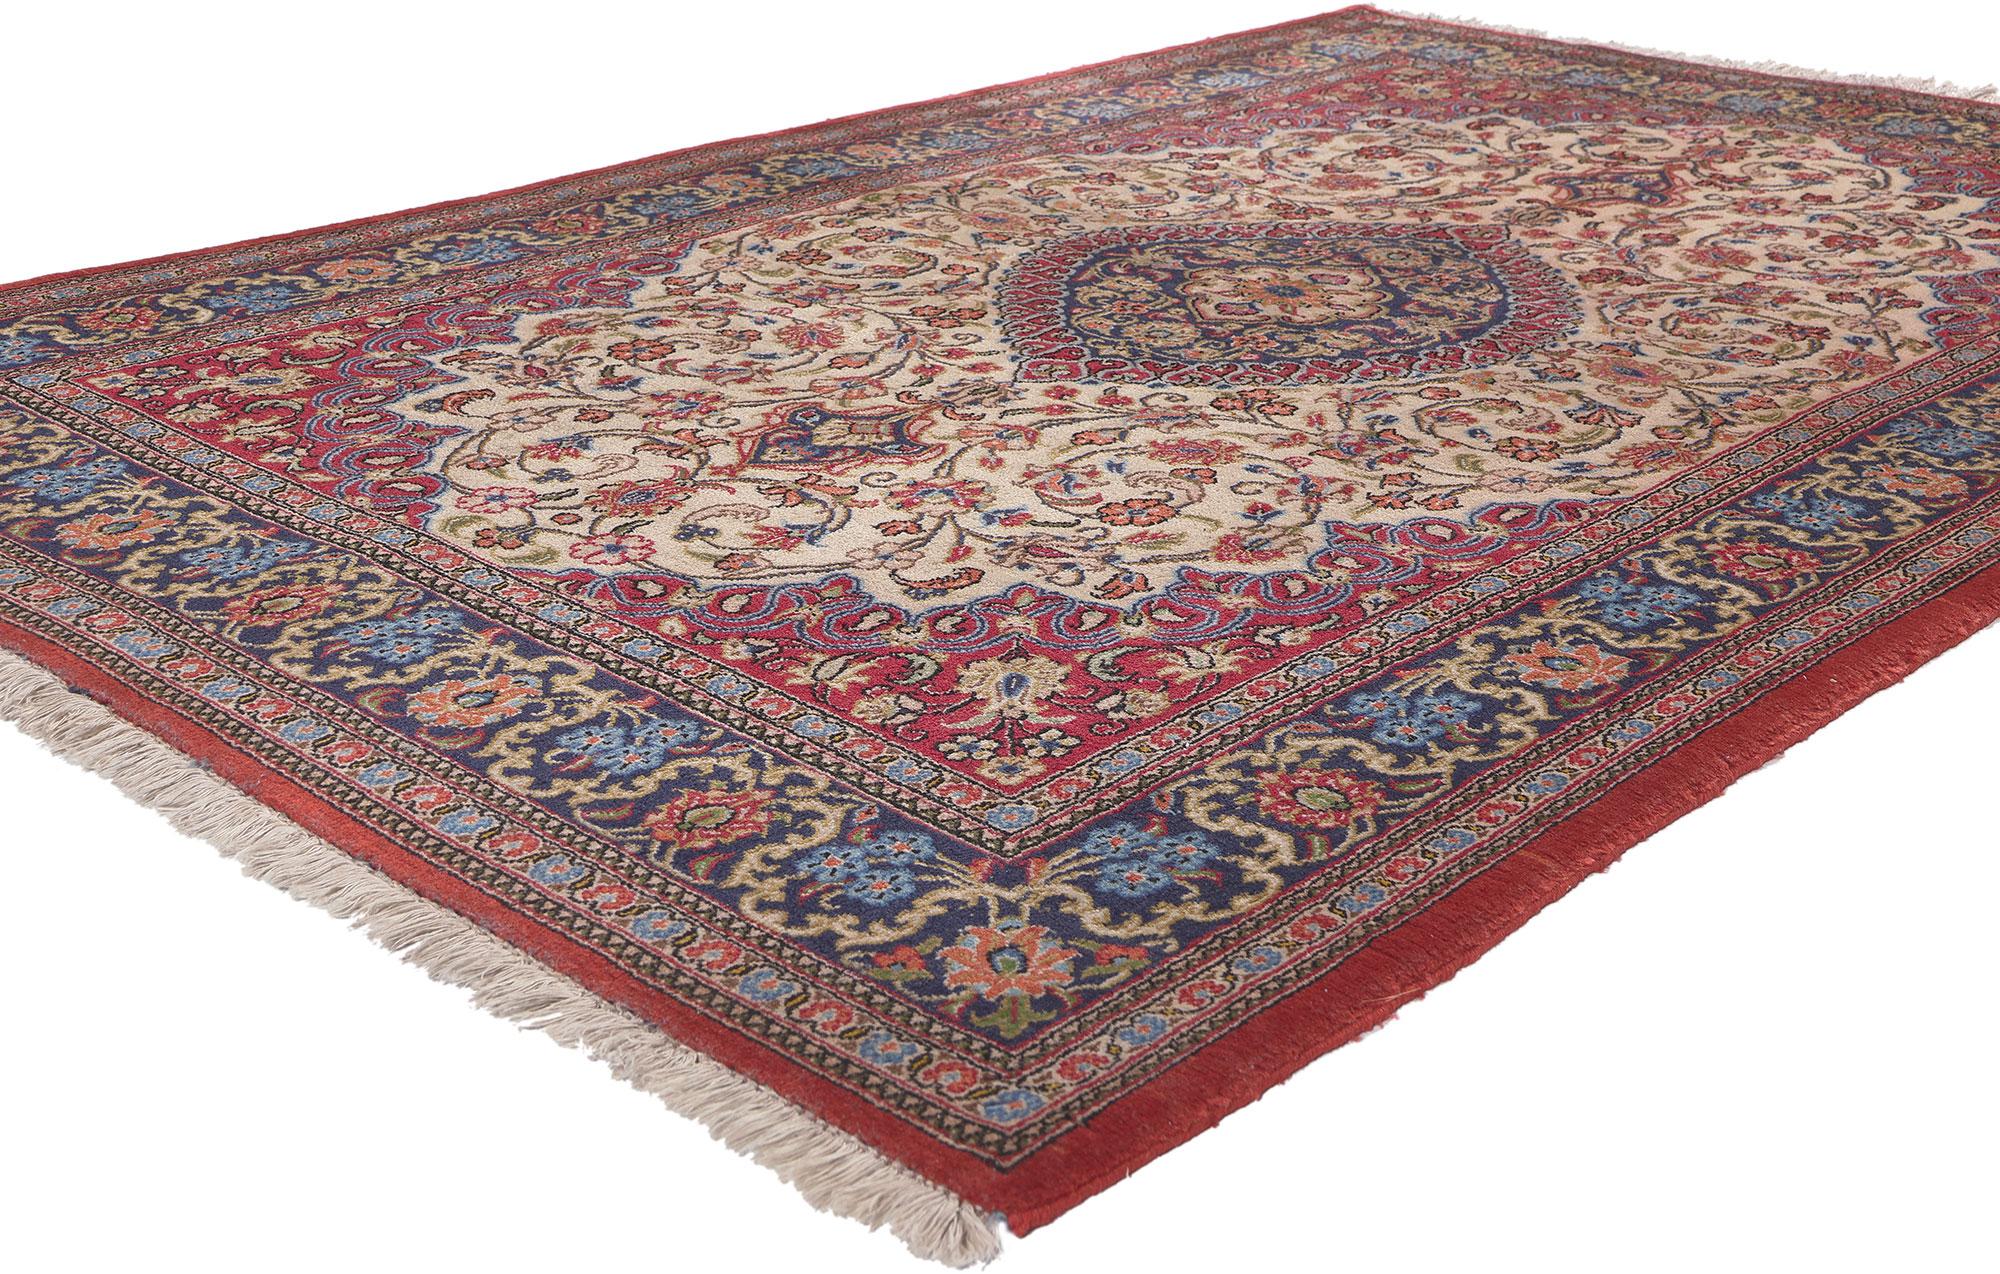 78689 Vintage Persian Qum Rug, 04'05 x 06'07. Persian Qum rugs are exquisite handwoven creations originating from the city of Qum in Iran, renowned for their exceptional craftsmanship and timeless beauty. Crafted from fine materials like silk or